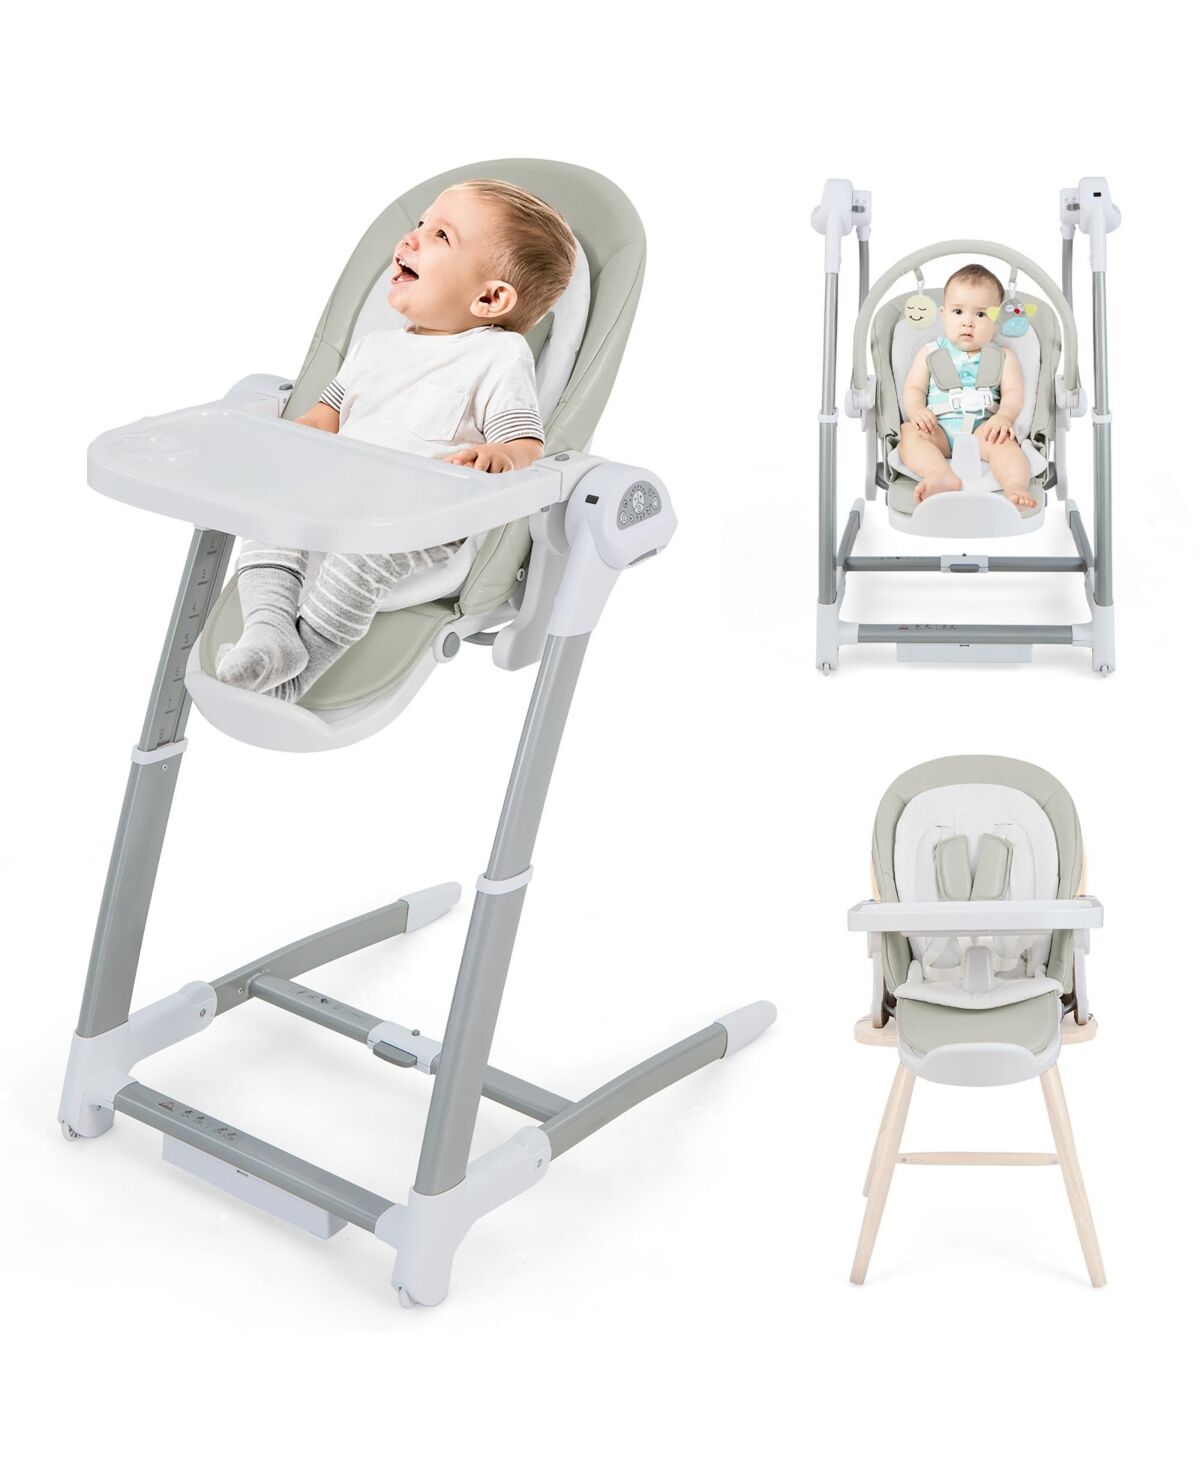 Costway 3-in-1 Baby Swing & High Chair with 8 Adjustable Heights & Music Box - Grey